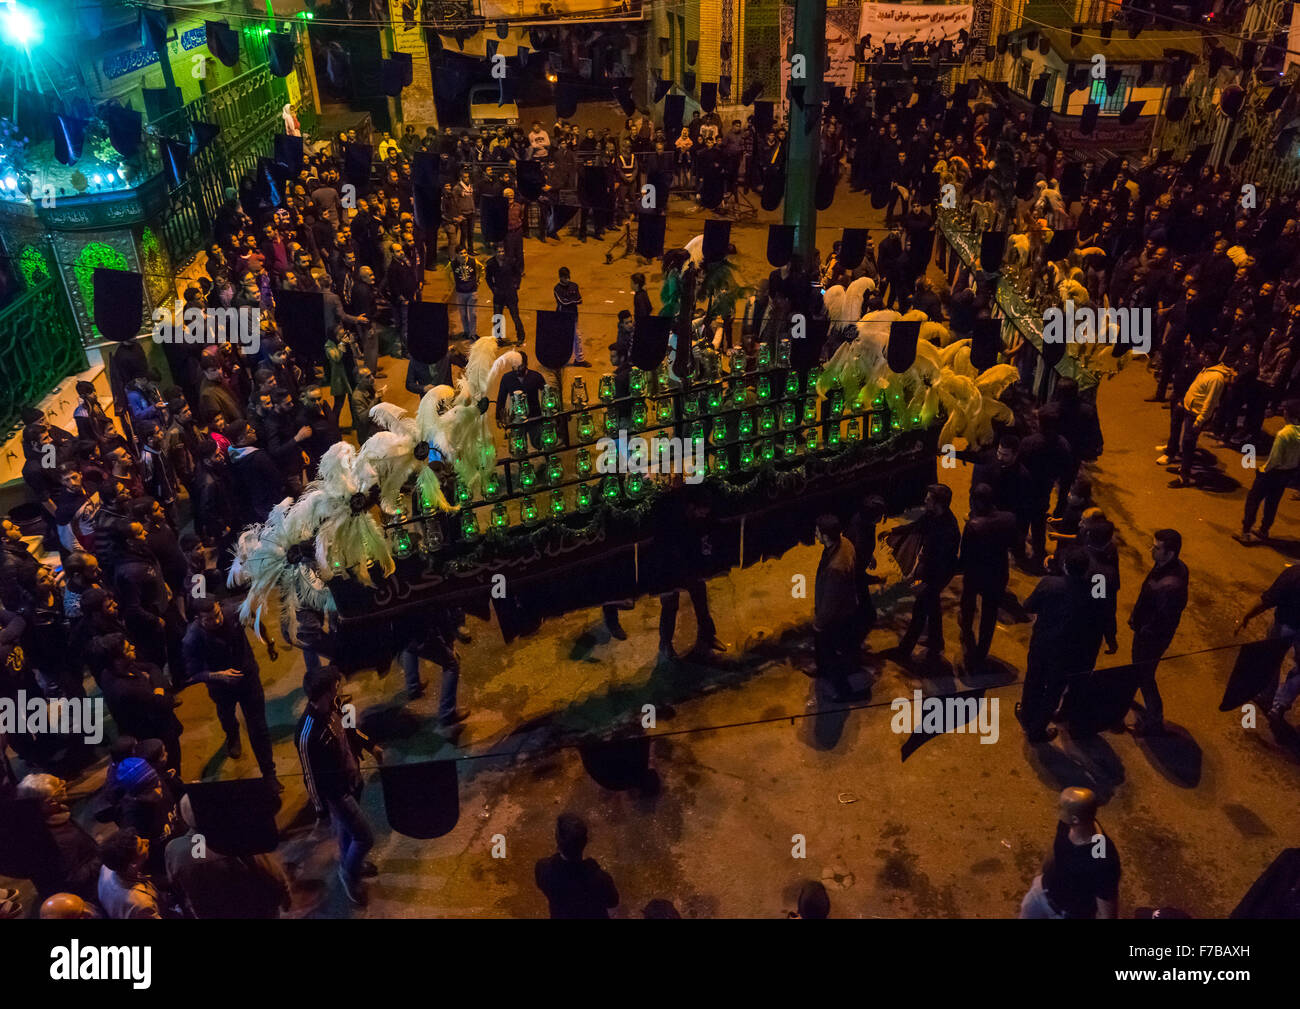 Iranian Shiite Muslim Men Mourners With An Alam In A Mosque Courtyard On Ashura, The Day Of The Death Of Imam Hussein, Golestan Province, Gorgan, Iran Stock Photo